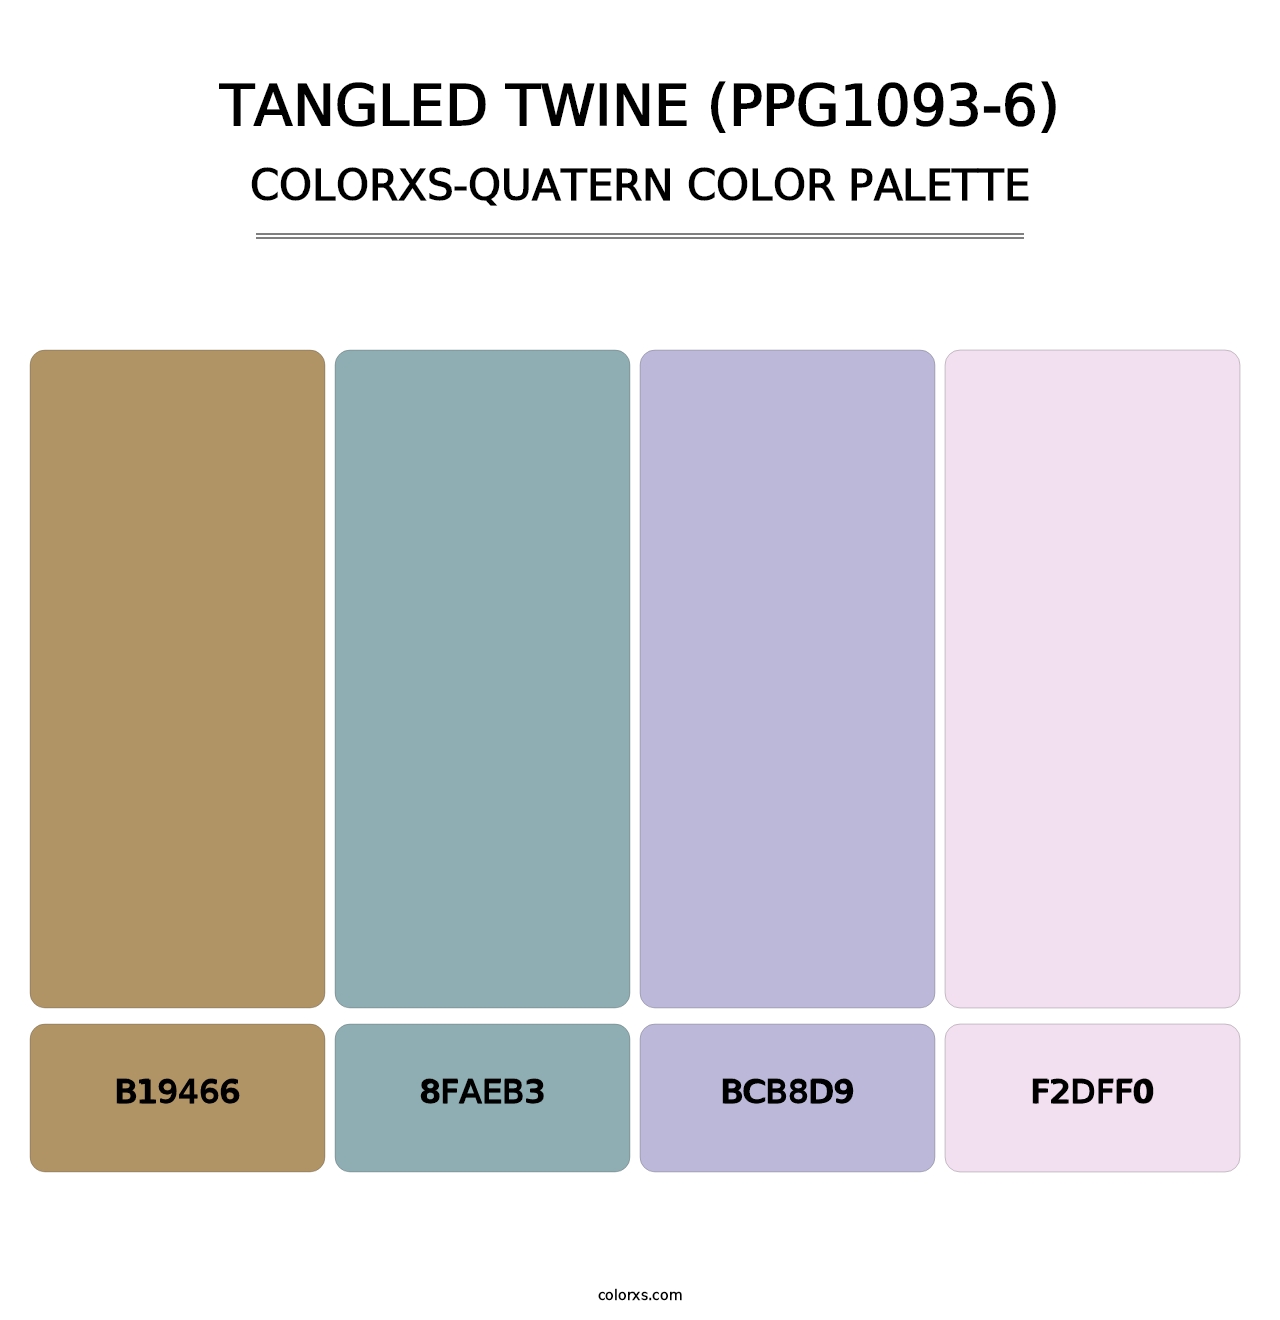 Tangled Twine (PPG1093-6) - Colorxs Quatern Palette